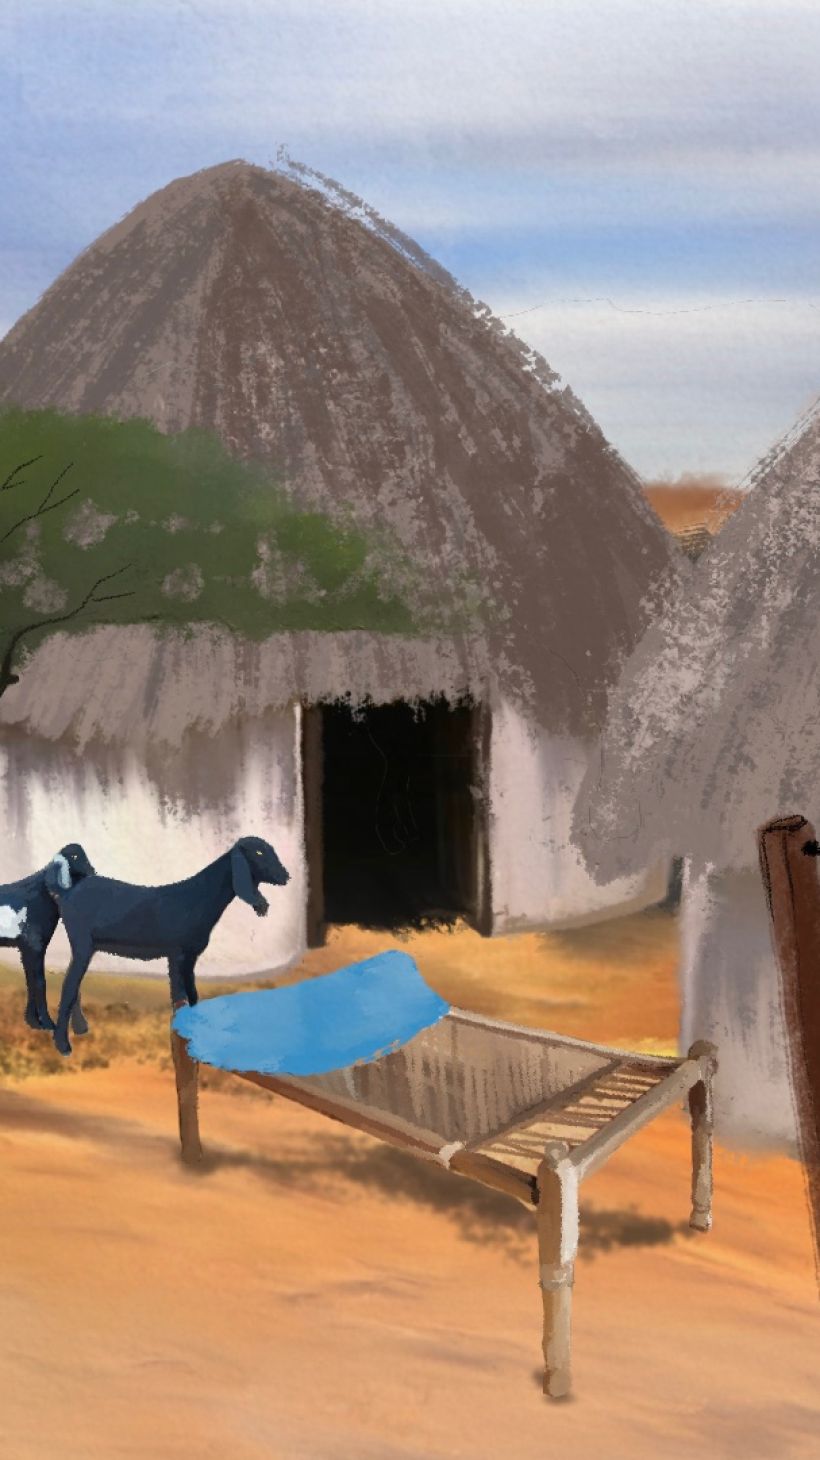 An illustration of two huts, one with a bed frame and a clothes line in front of it and the other with two goats in front.